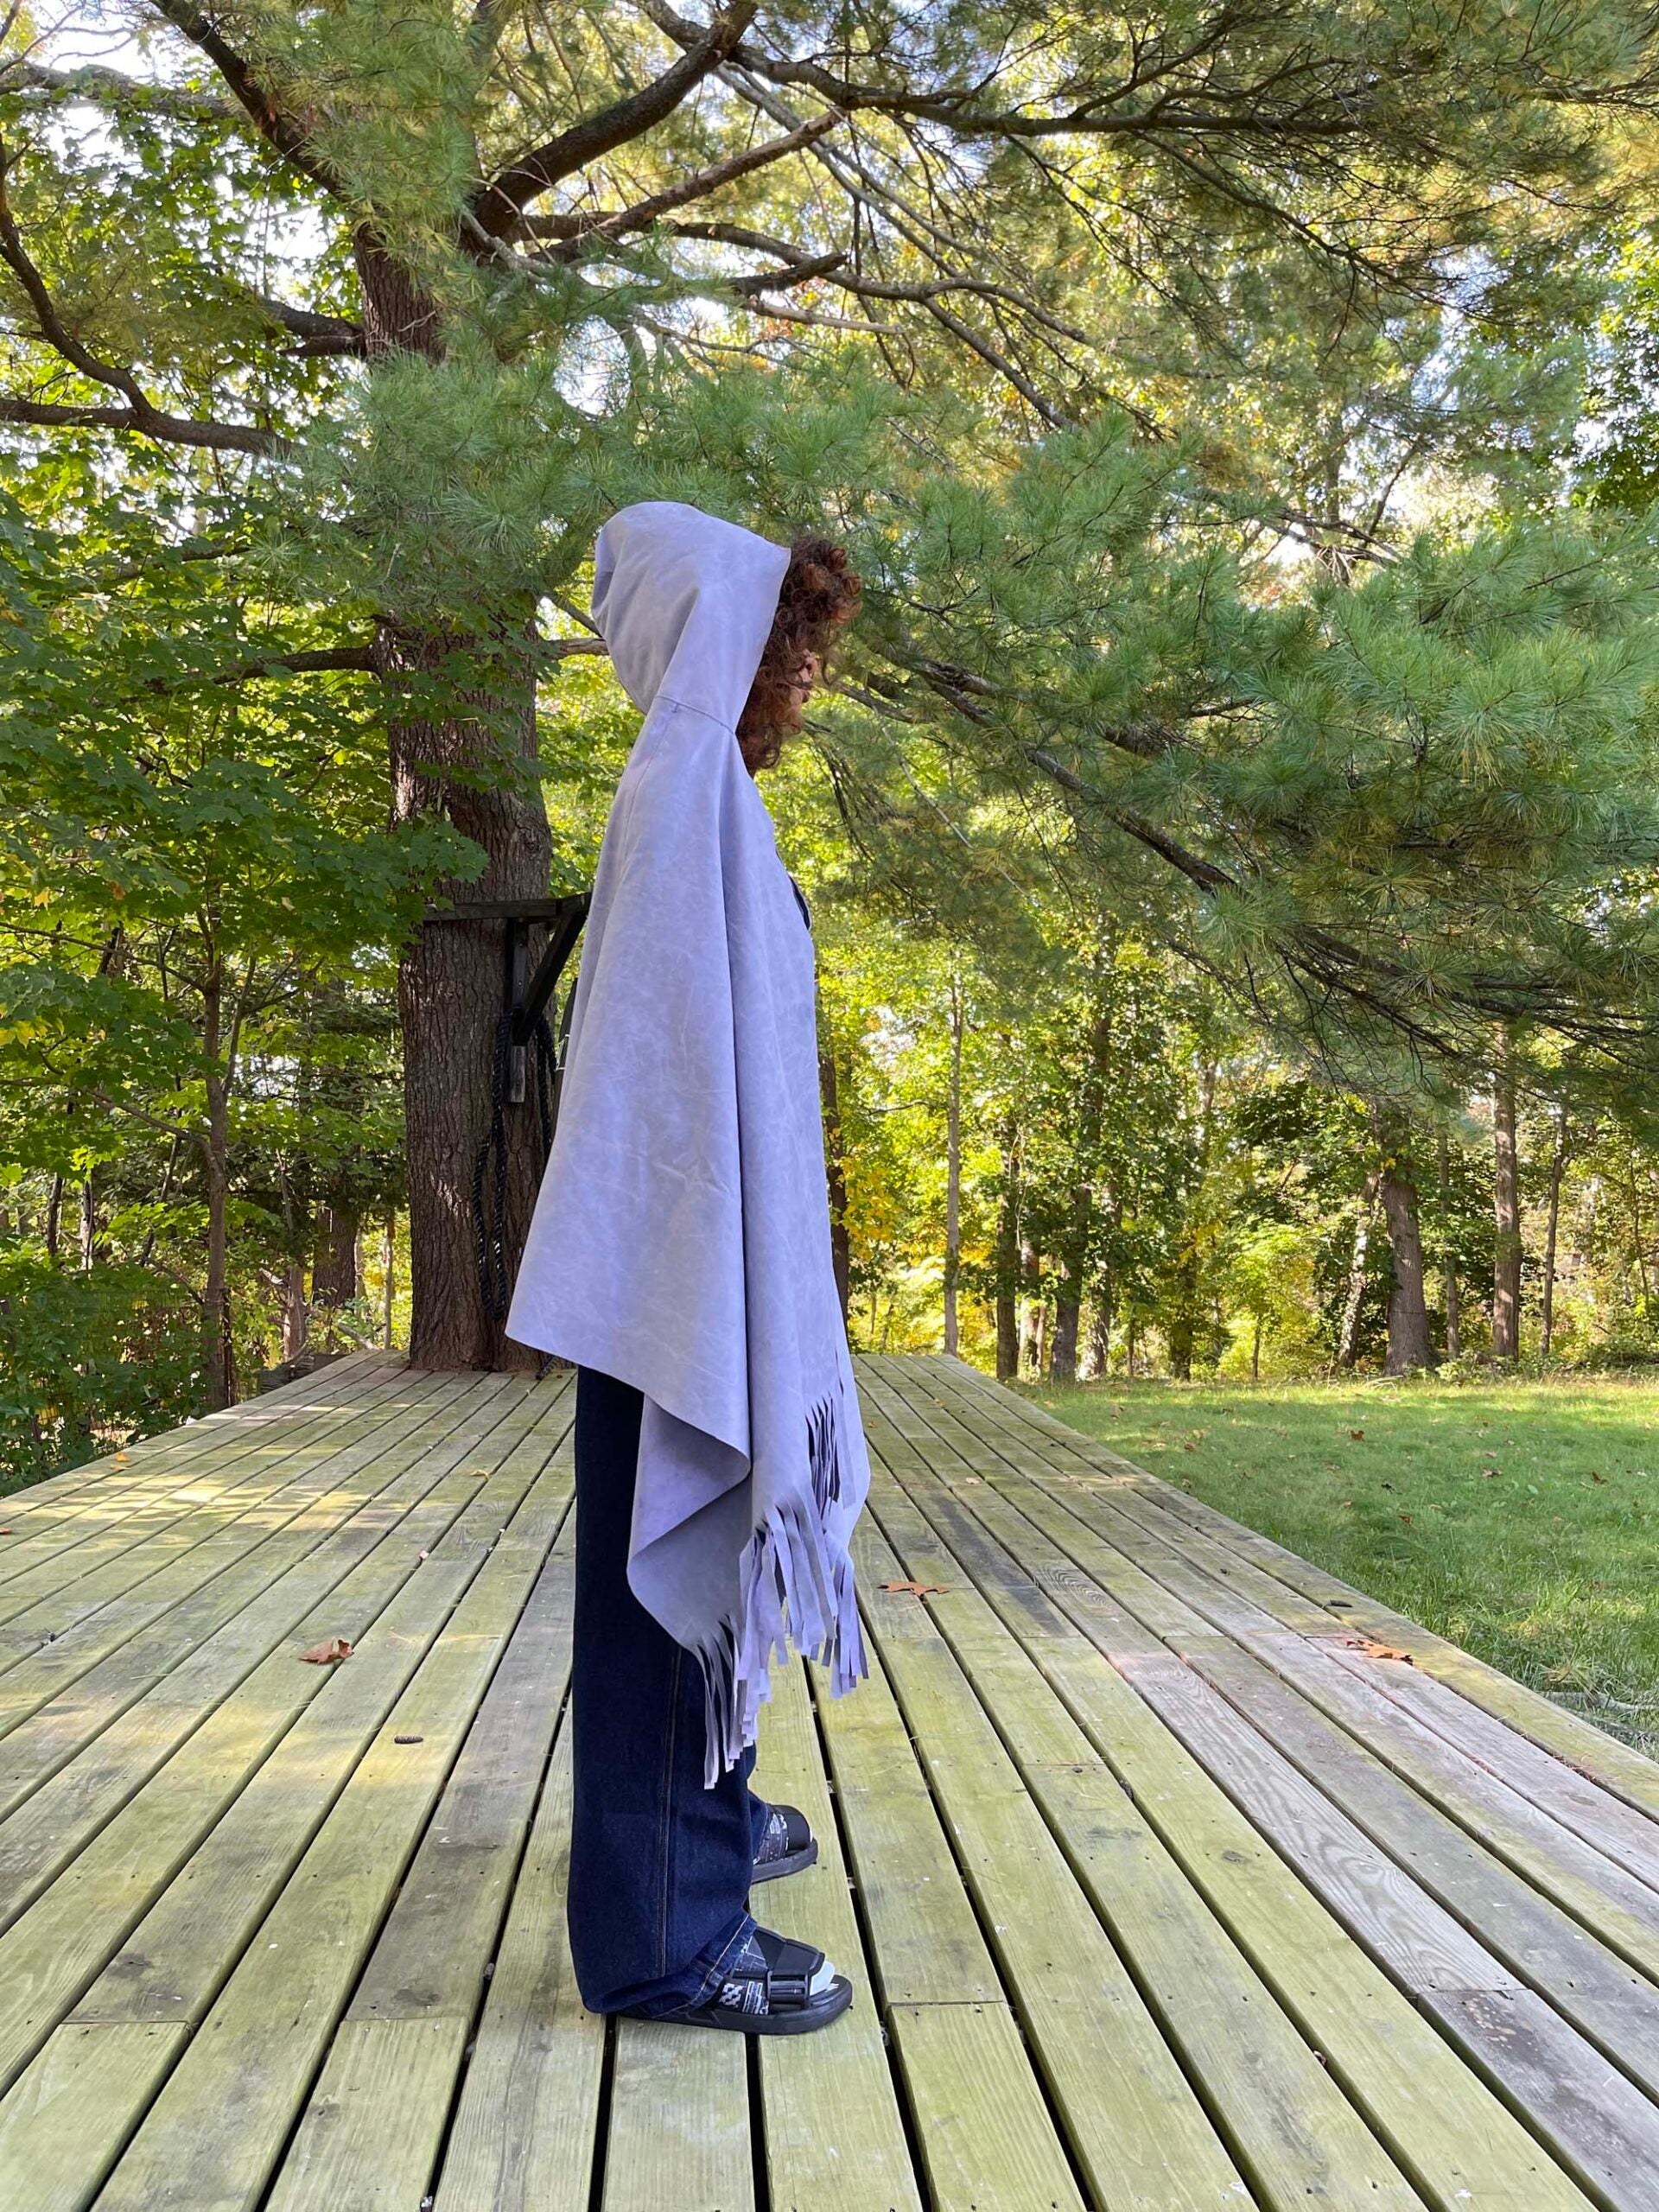 Suede backpack transforms into a hooded cloak